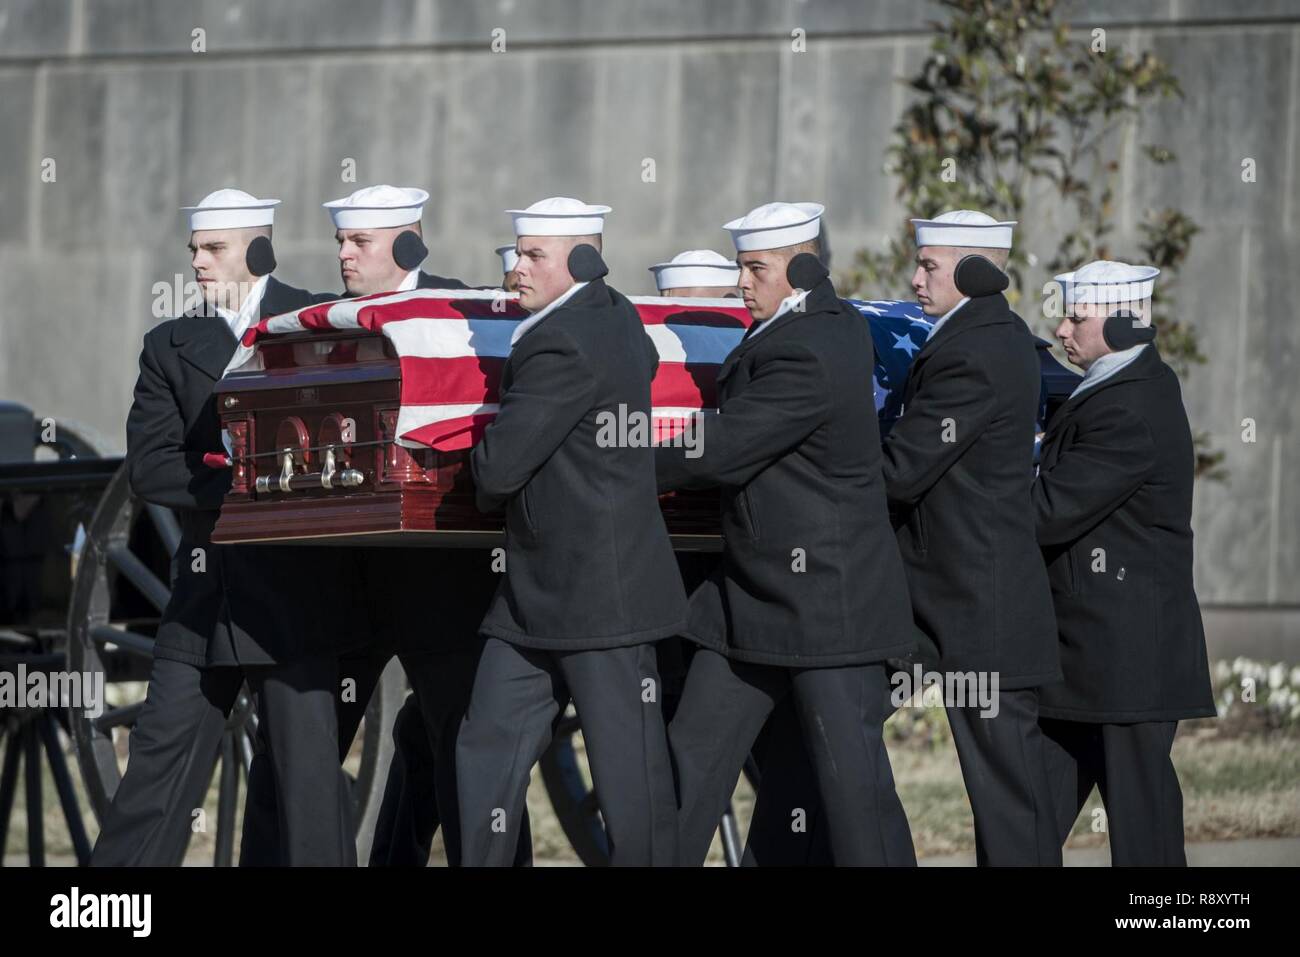 Sailors from the U.S. Navy Ceremonial Guard folds the U.S. flag as part of the military funeral honors with funeral escort for U.S. Navy Seaman 1st Class William Bruesewitz in Section 60 of Arlington National Cemetery, Arlington, Virginia, Dec. 7, 2018. On Dec. 7, 1941, Bruesewitz was assigned to the battleship USS Oklahoma which was moored at Ford Island, Pearl Harbor when the ship was attacked by Japanese aircraft. After sustaining multiple torpedo hits, the USS Oklahoma quickly capsized and resulted in the deaths of 429 crewmen, including Bruesewitz.    From the Defense POW/MIA Accounting A Stock Photo